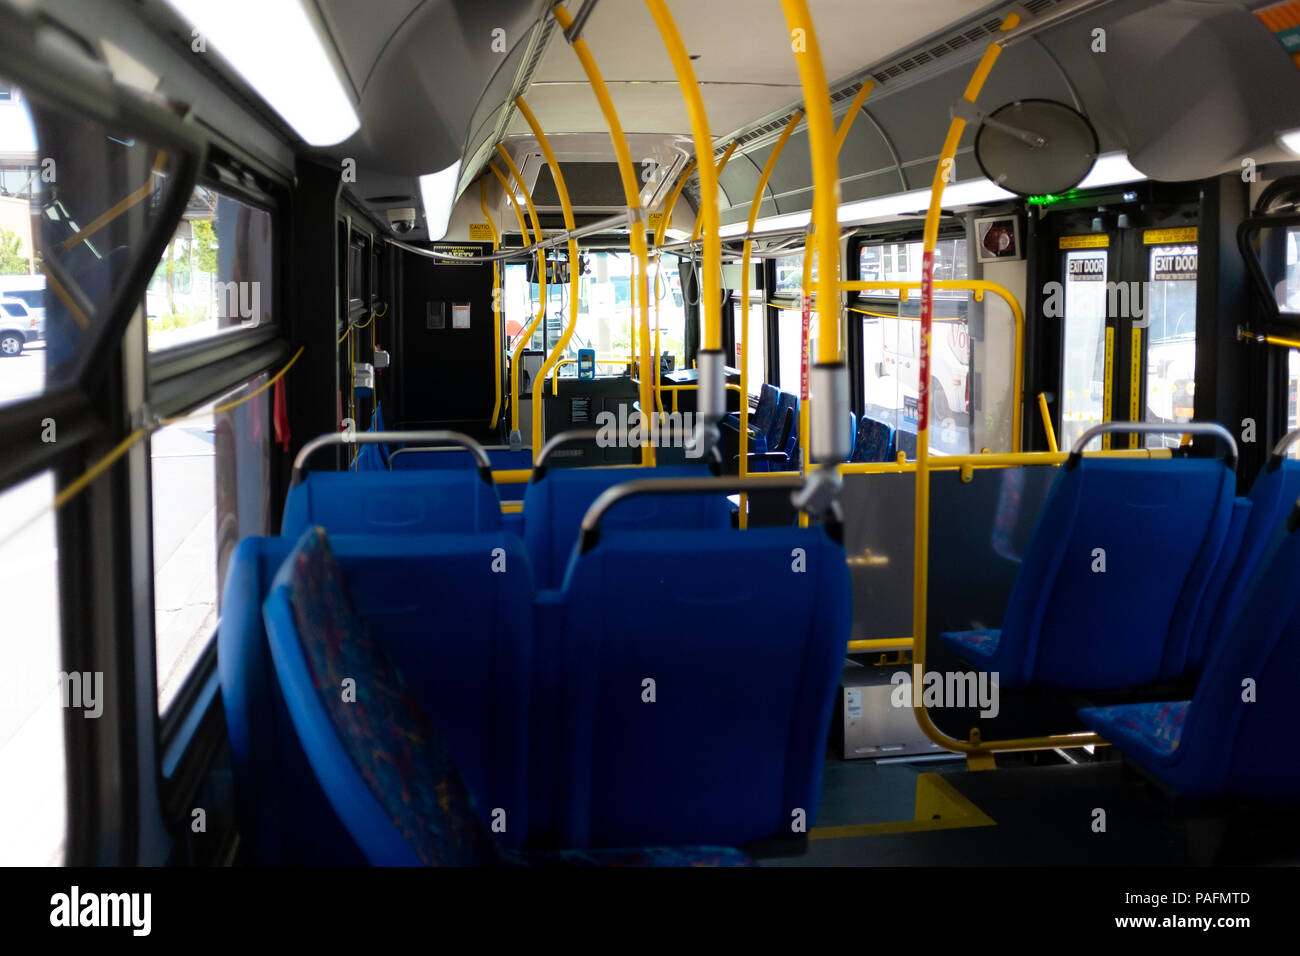 Horizontal colour image showing the interior of city bus with no people in it. Stock Photo